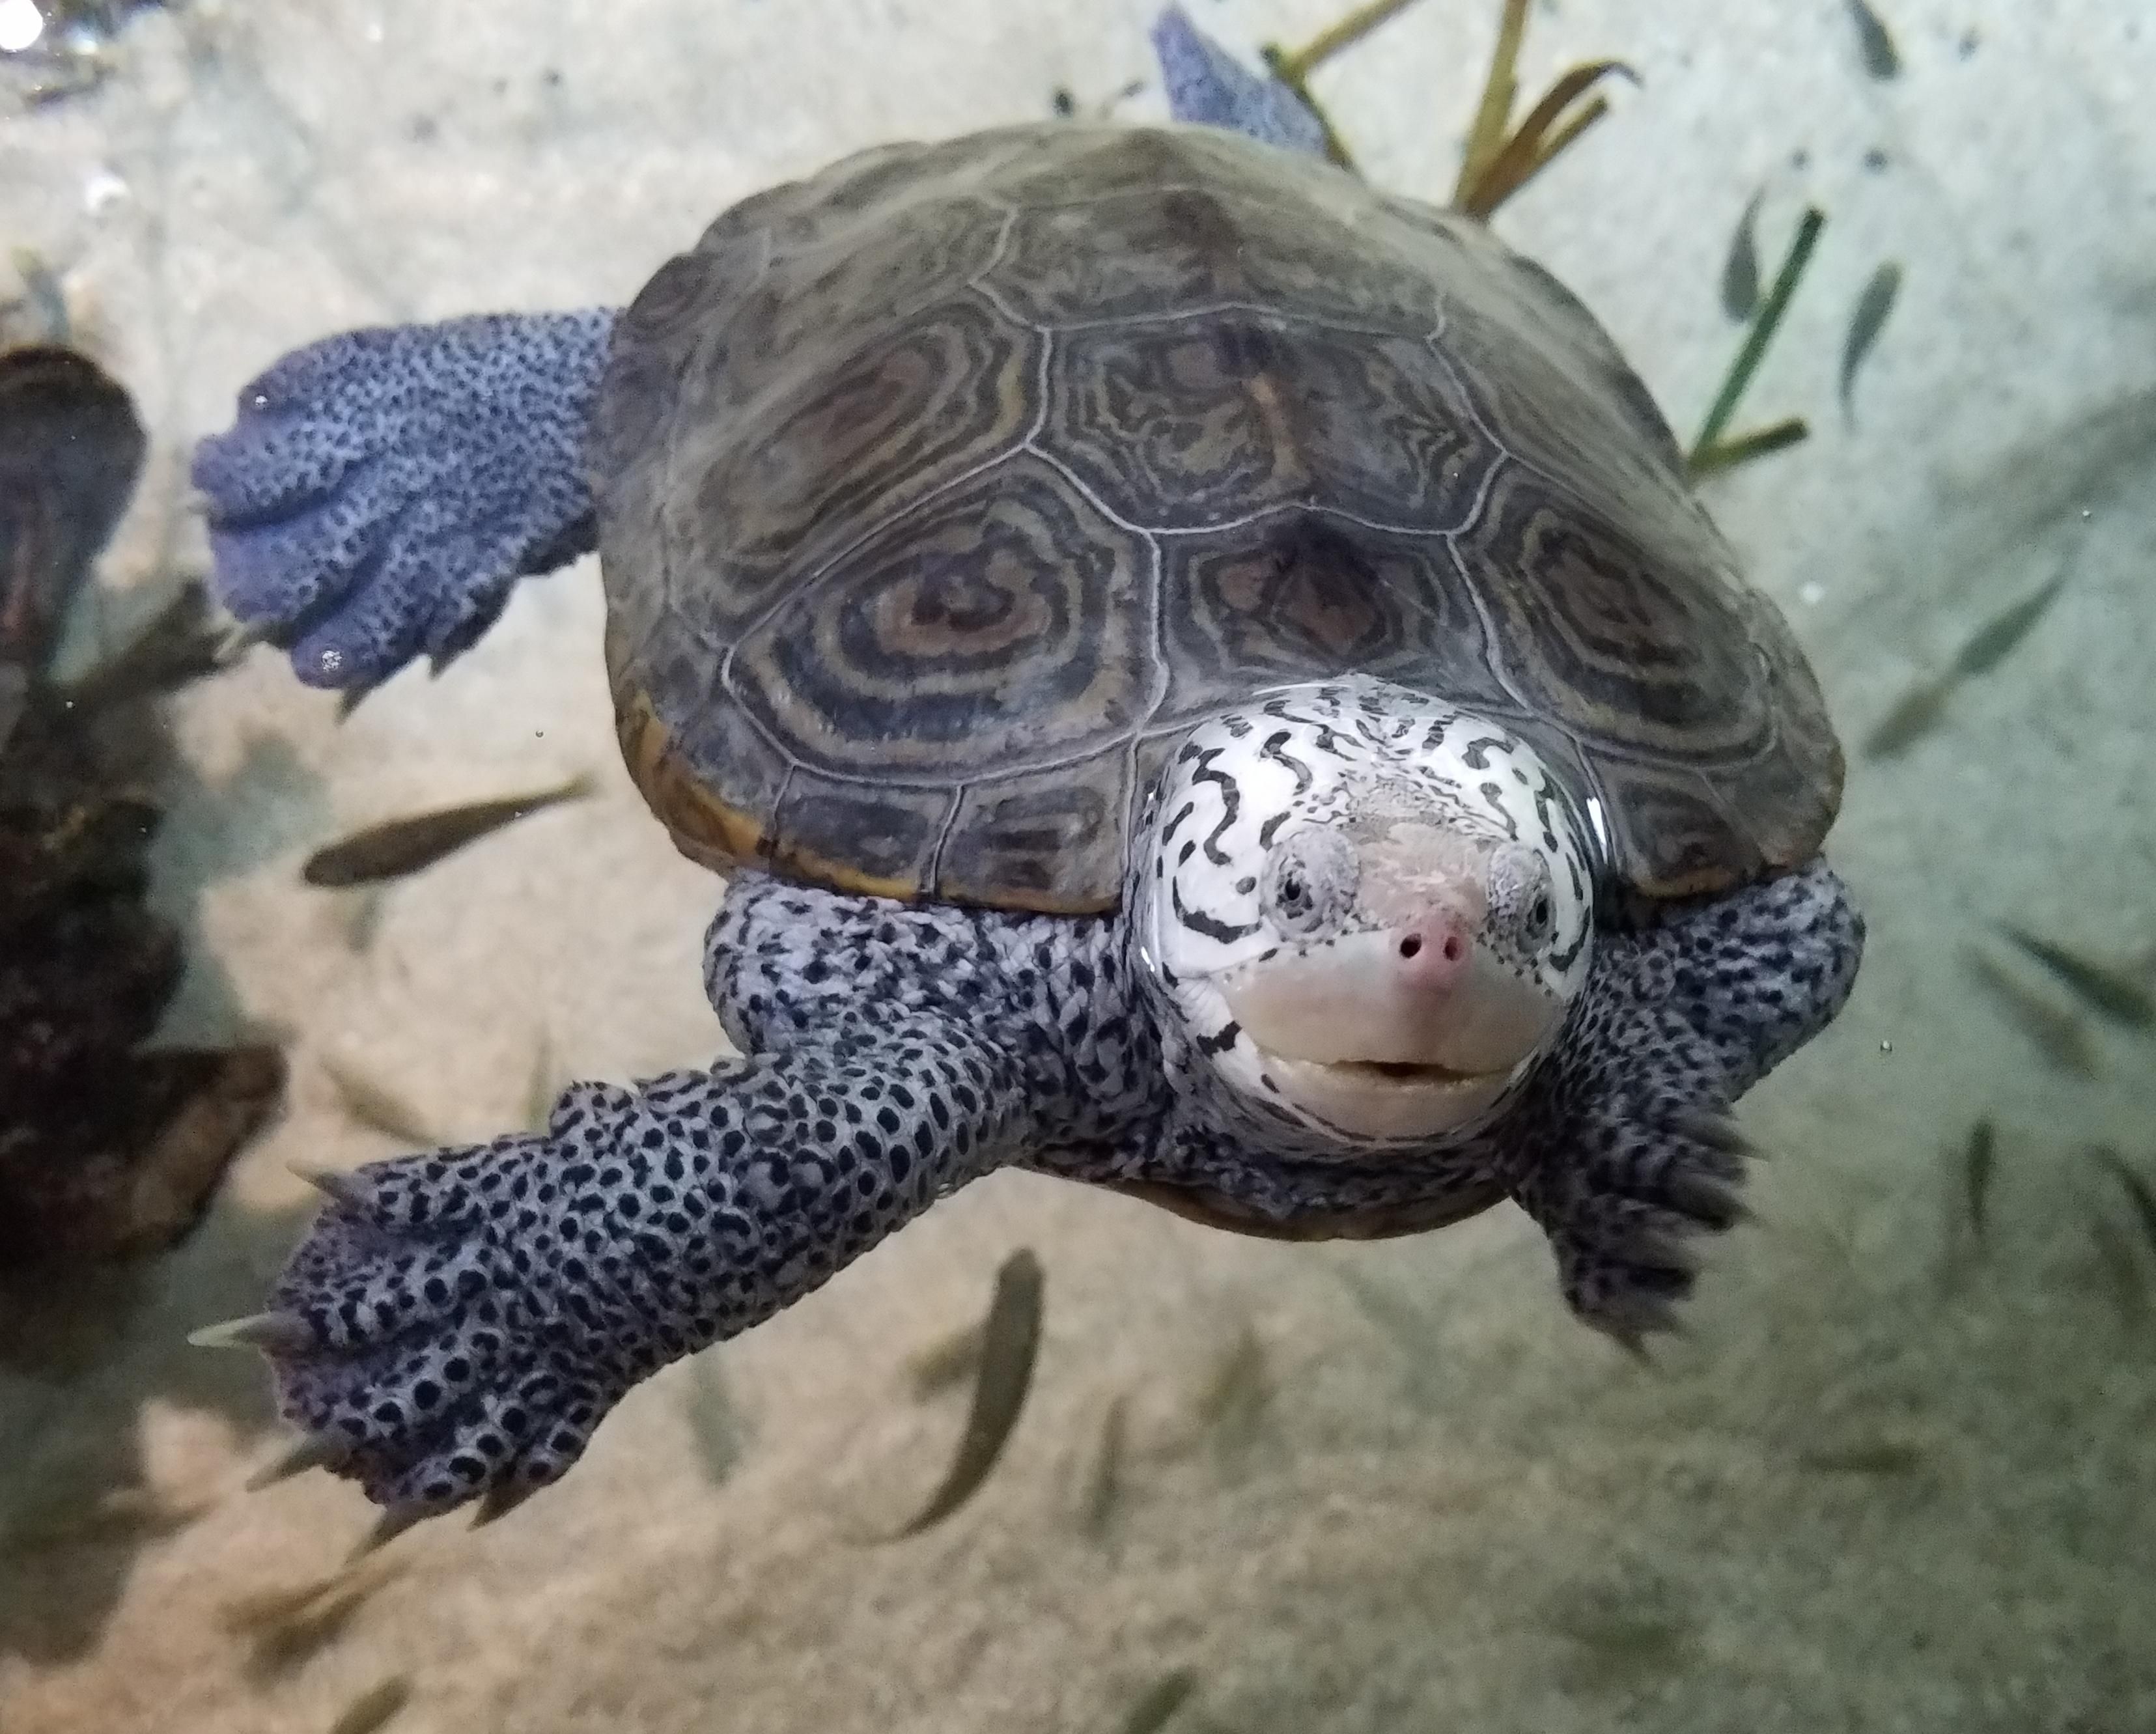 The diamondback terrapin is one of several animal and plant species in the U.S. already affected by the climate crisis.